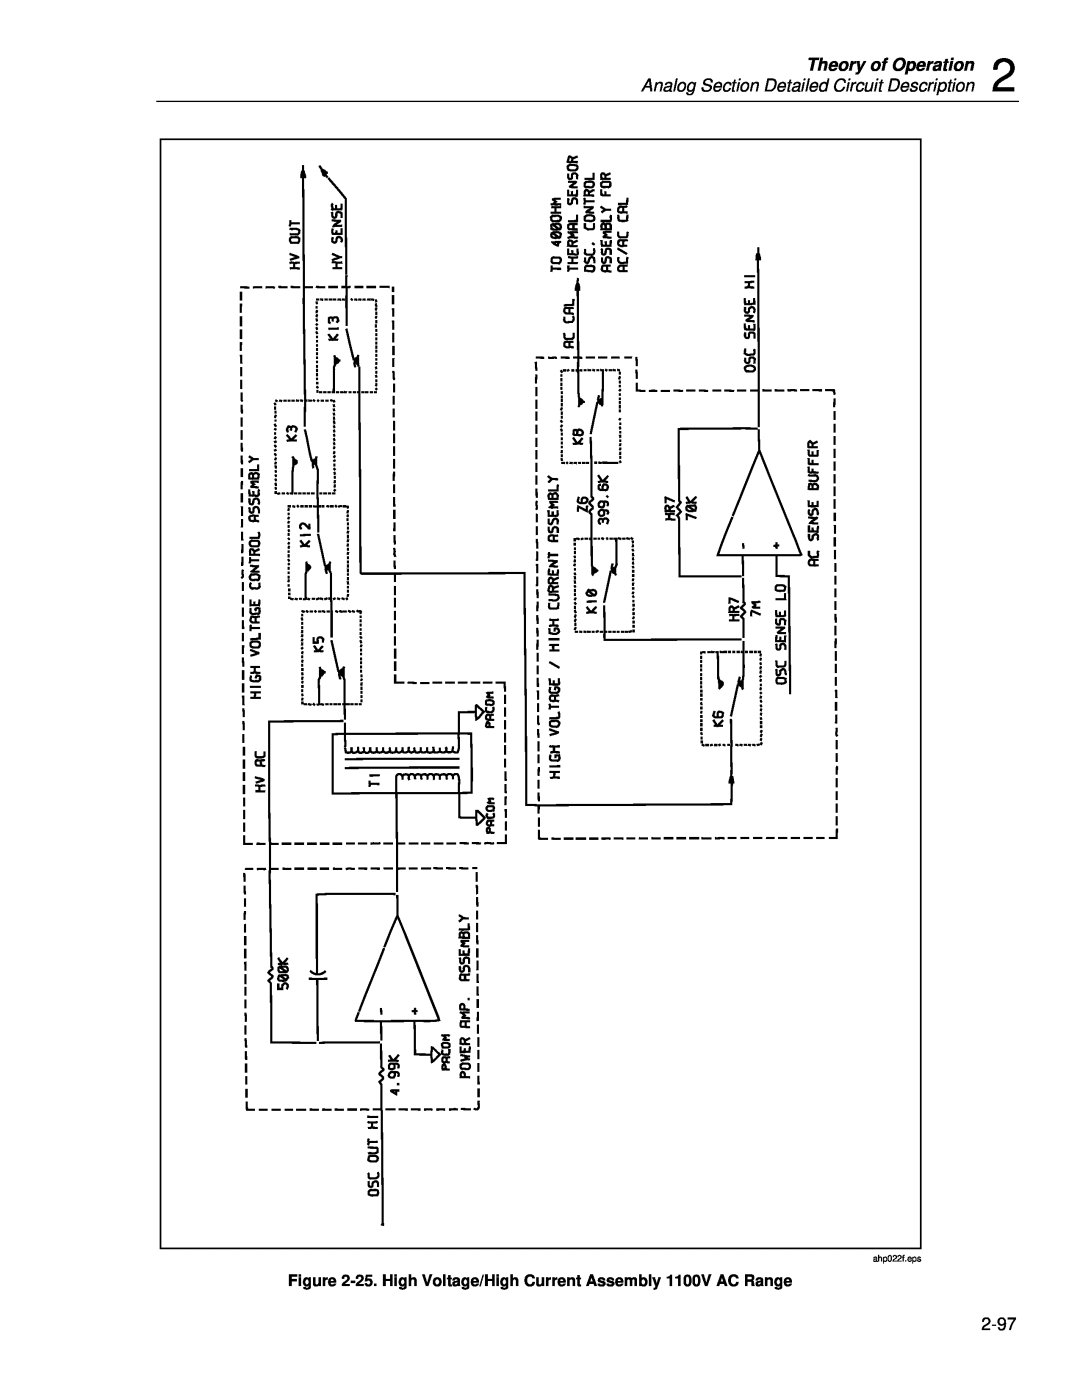 Fluke 5720A service manual Theory of Operation, Analog Section Detailed Circuit Description, ahp022f.eps 